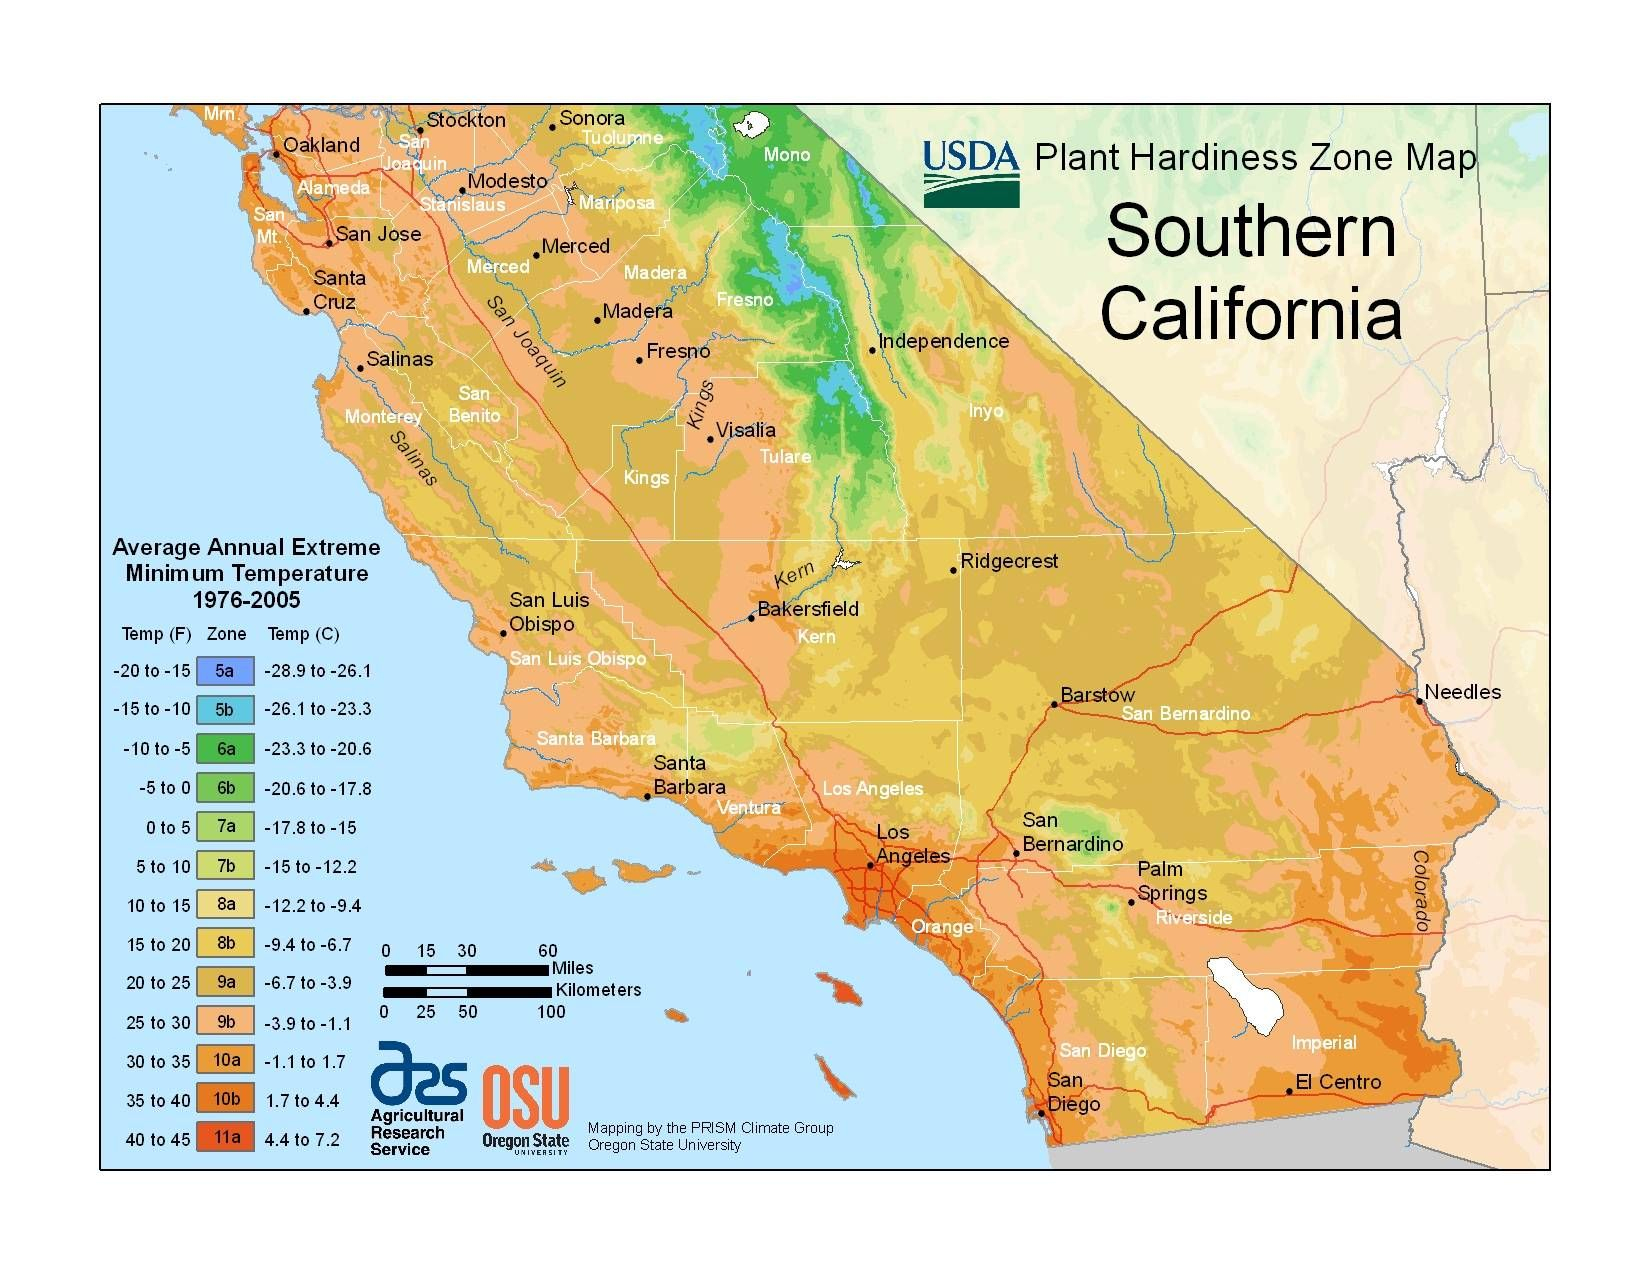 Southern California Hardiness Zone Map I Guess I&amp;#039;m 10B Or Maybe 10A - Plant Zone Map California